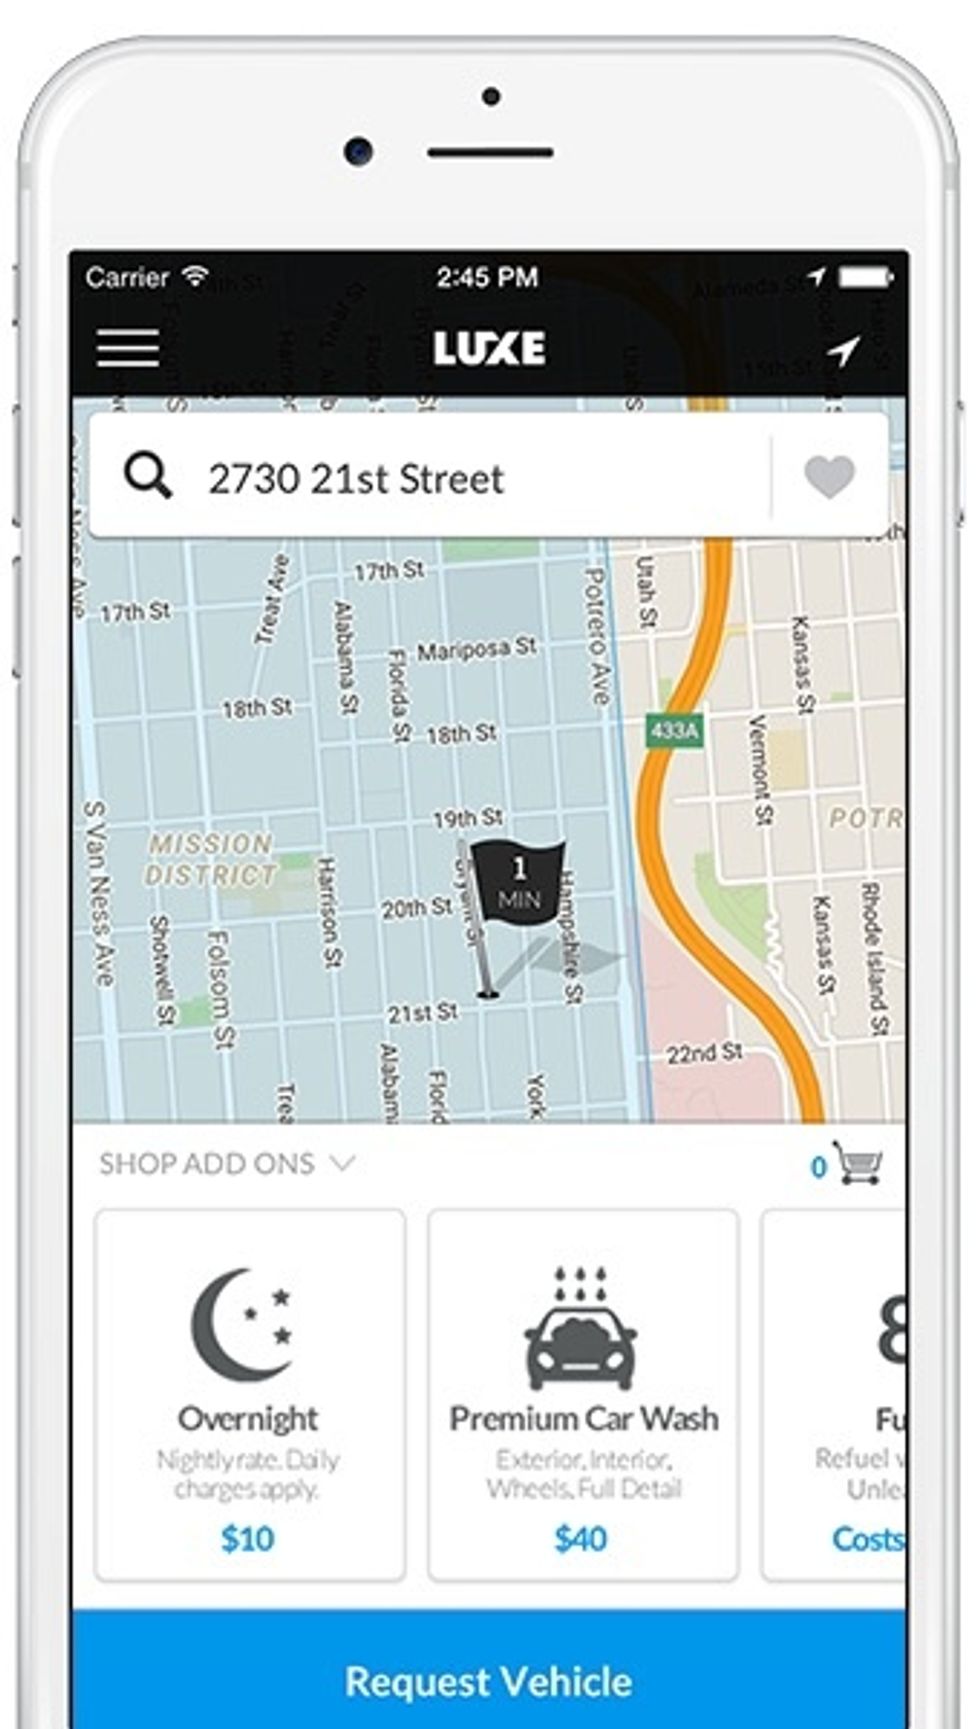 A screenshot of the Luxe app, showing an address where to pick up a car and what service, like parking, is being requested